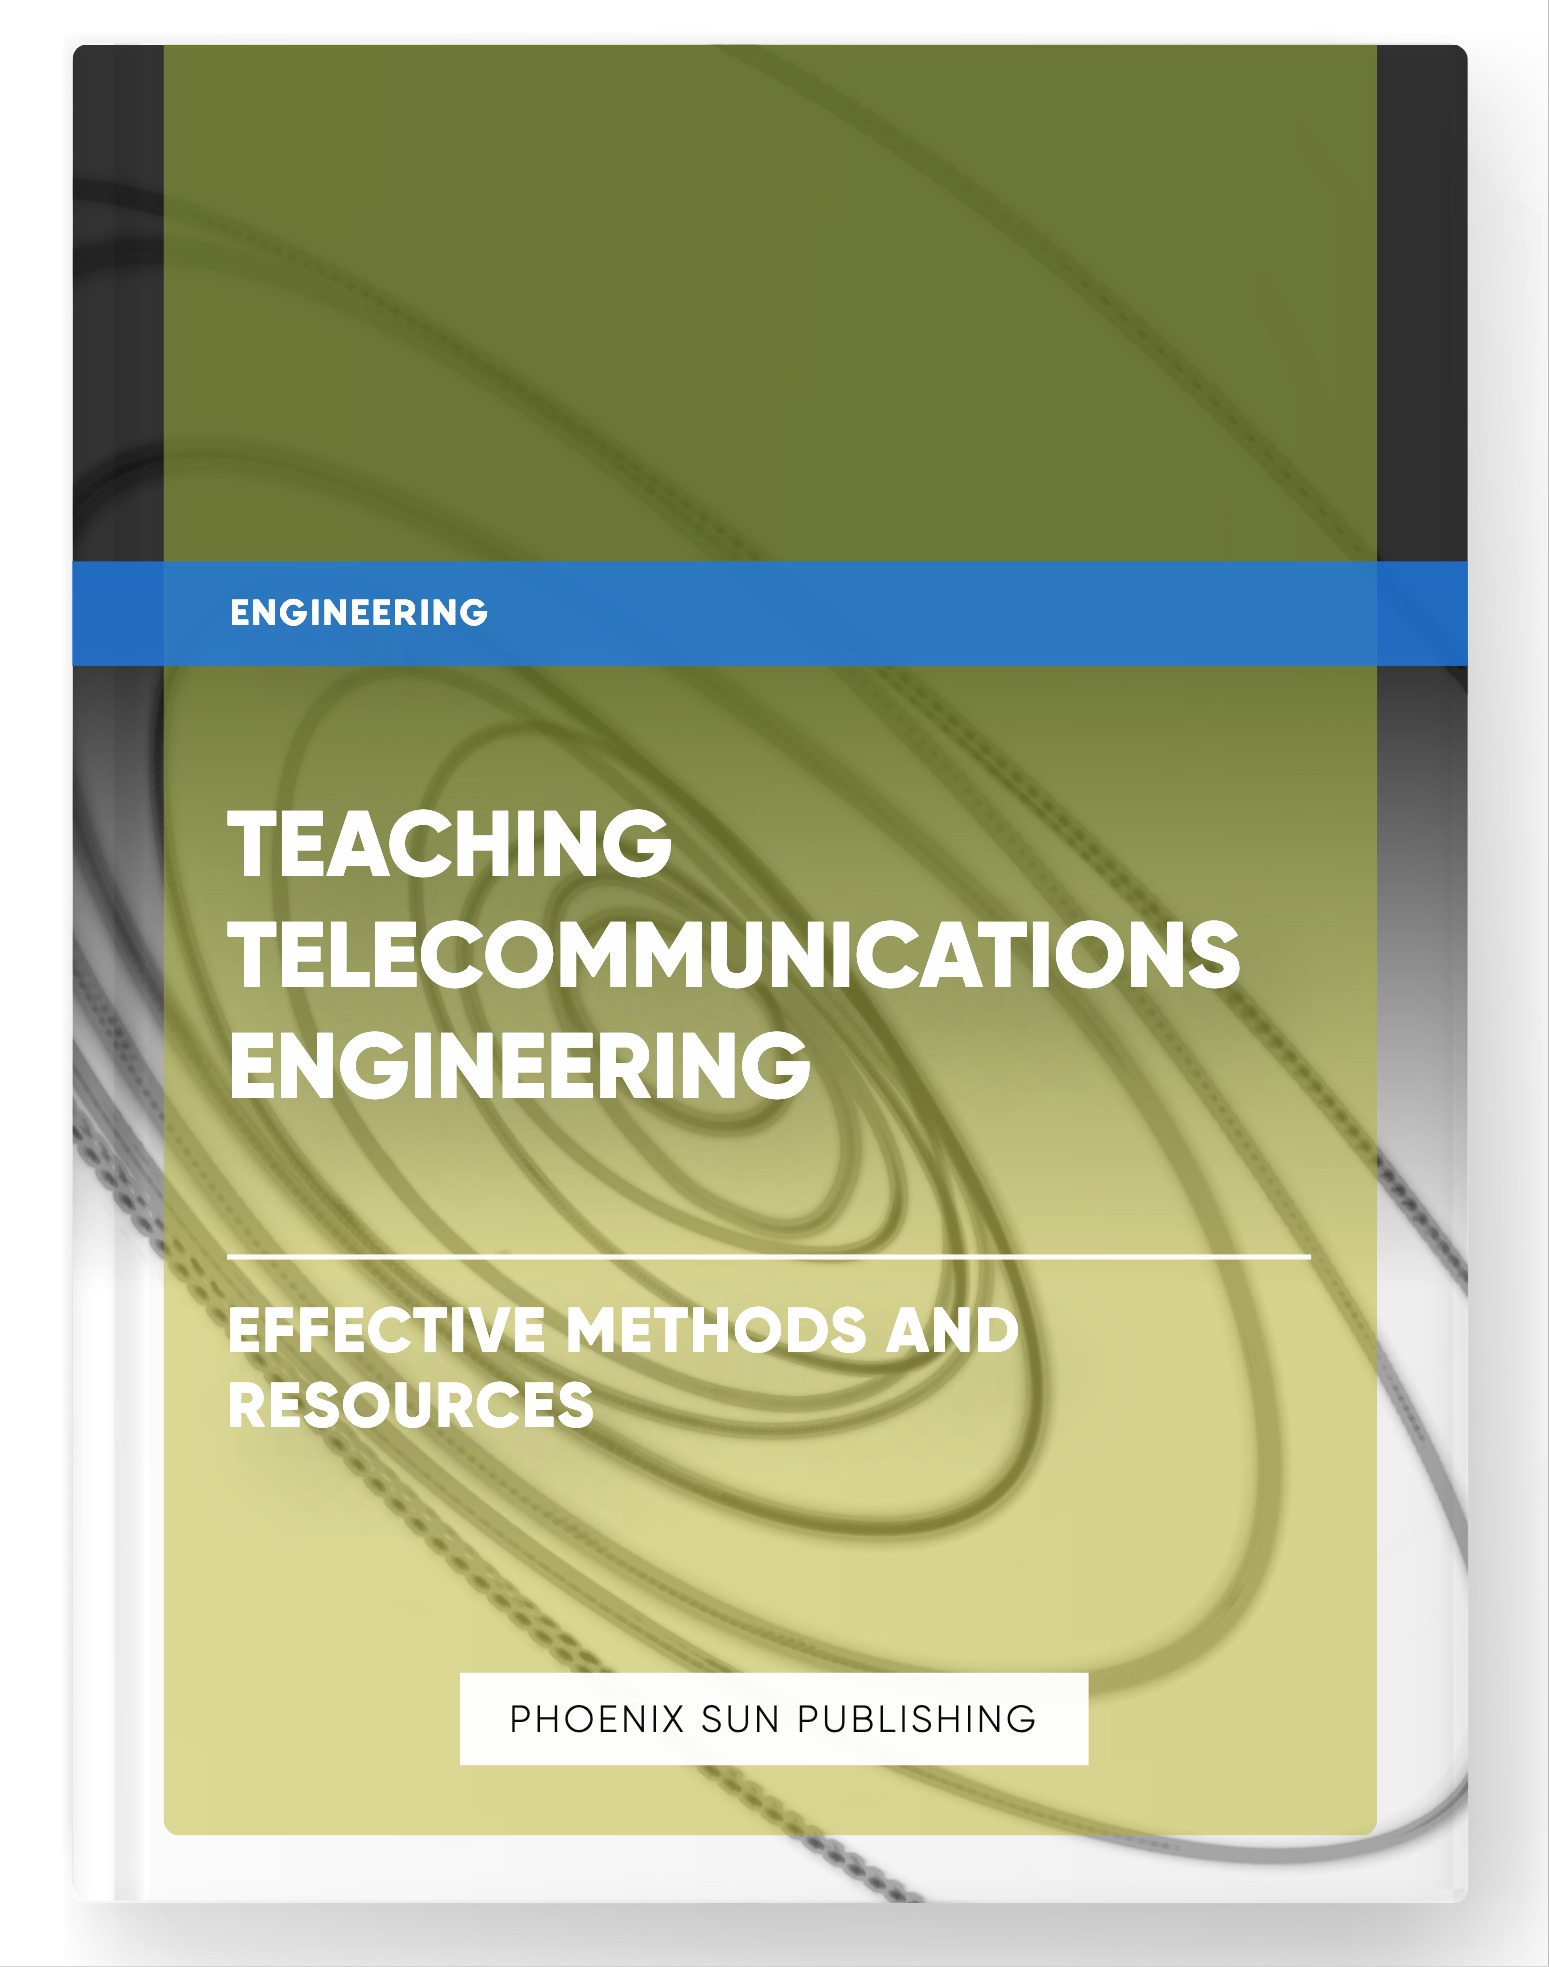 Teaching Telecommunications Engineering – Effective Methods and Resources